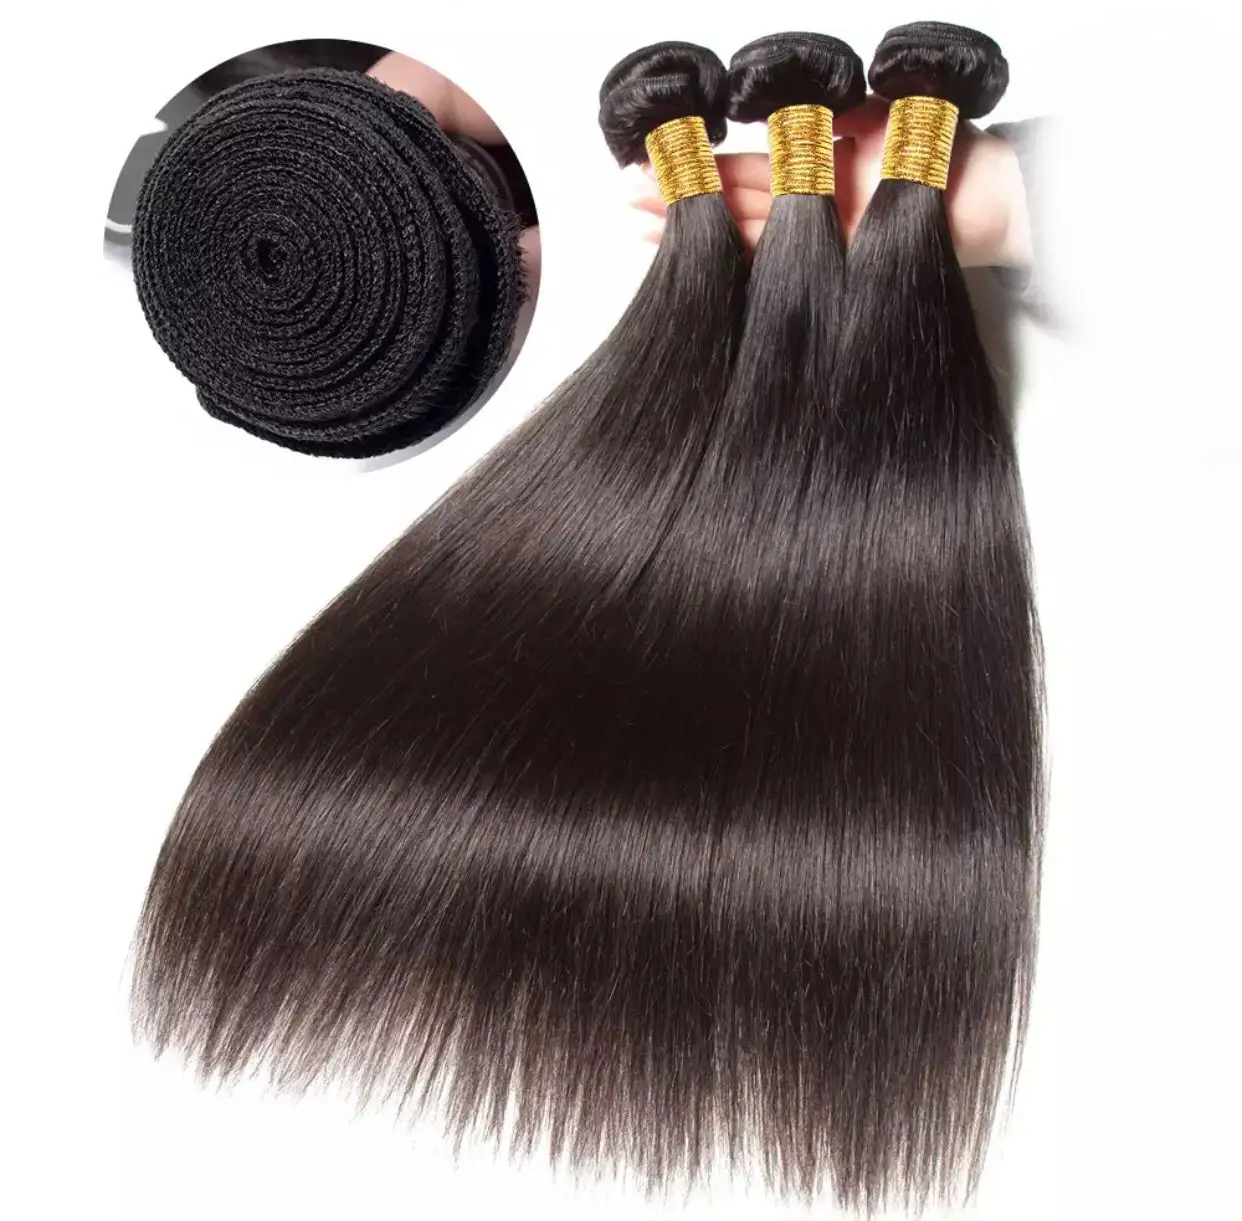 BLACK FRIDAY SALE NATURAL UNPROCESSED 10A 12A GRADE SILKY STRAIGHT RAW INDIAN HUMAN HAIR WITH BEST OFFER PRICE